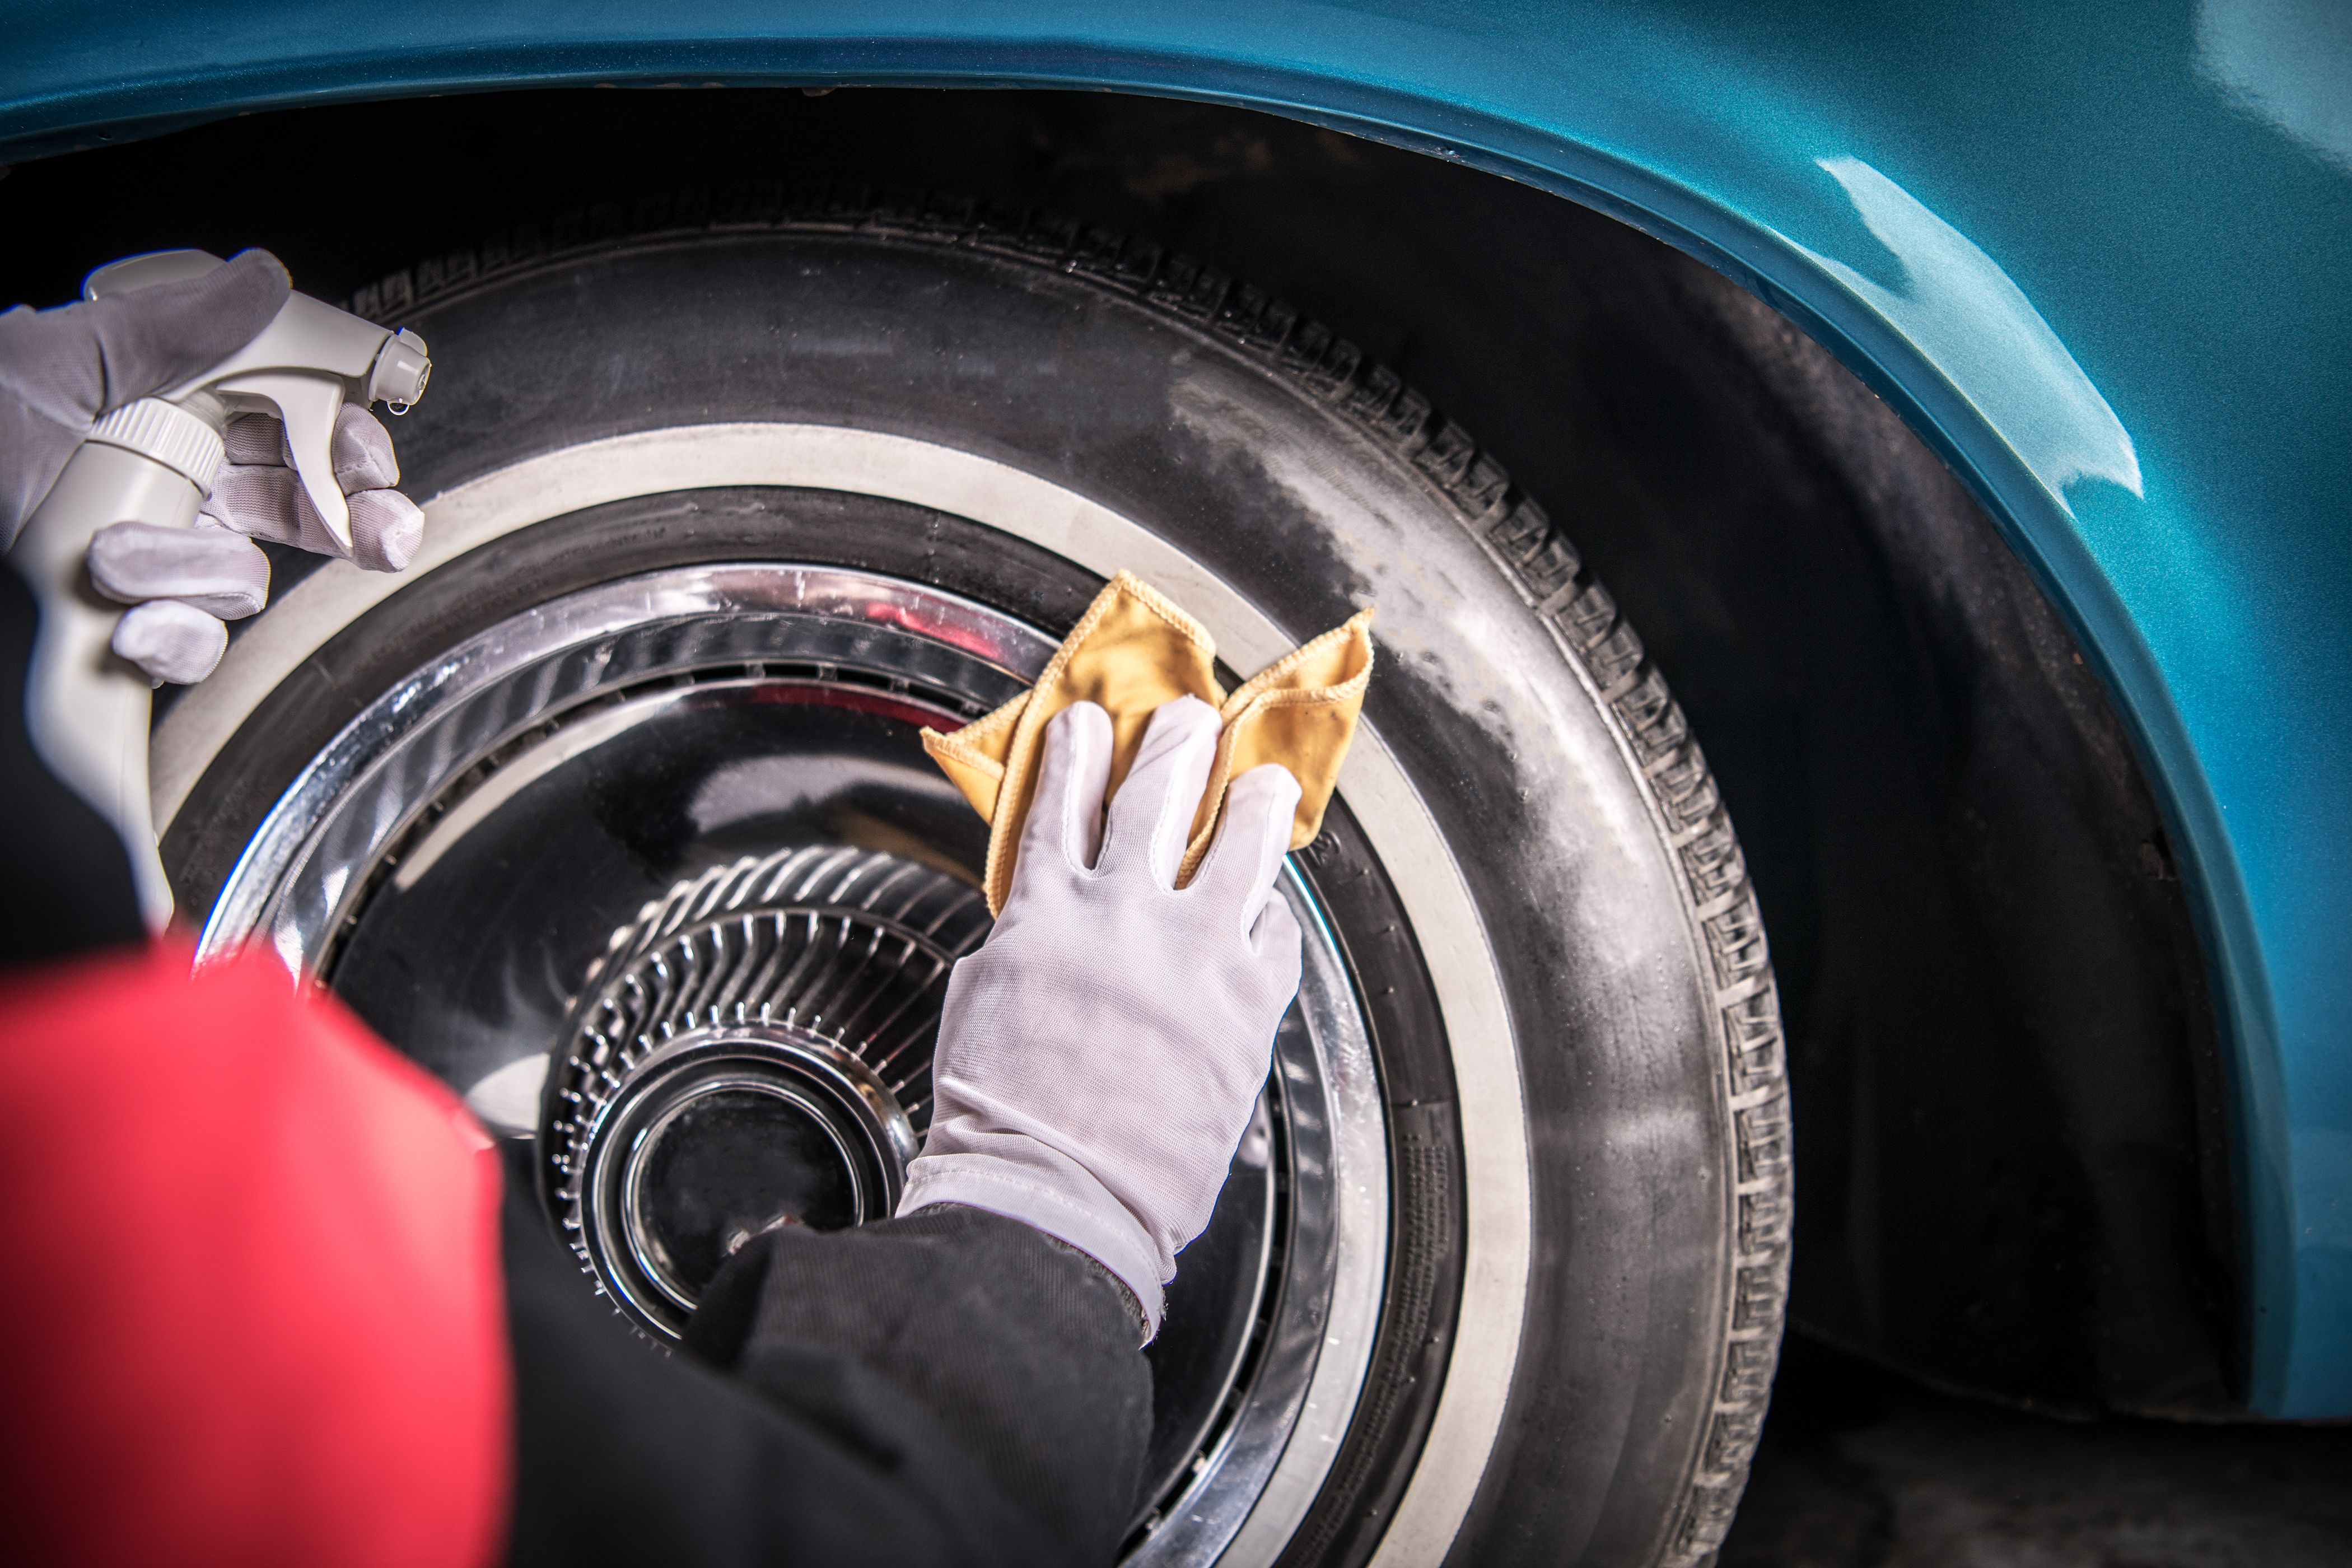 When performing maintenance on your classic car, don't forget about the tires!